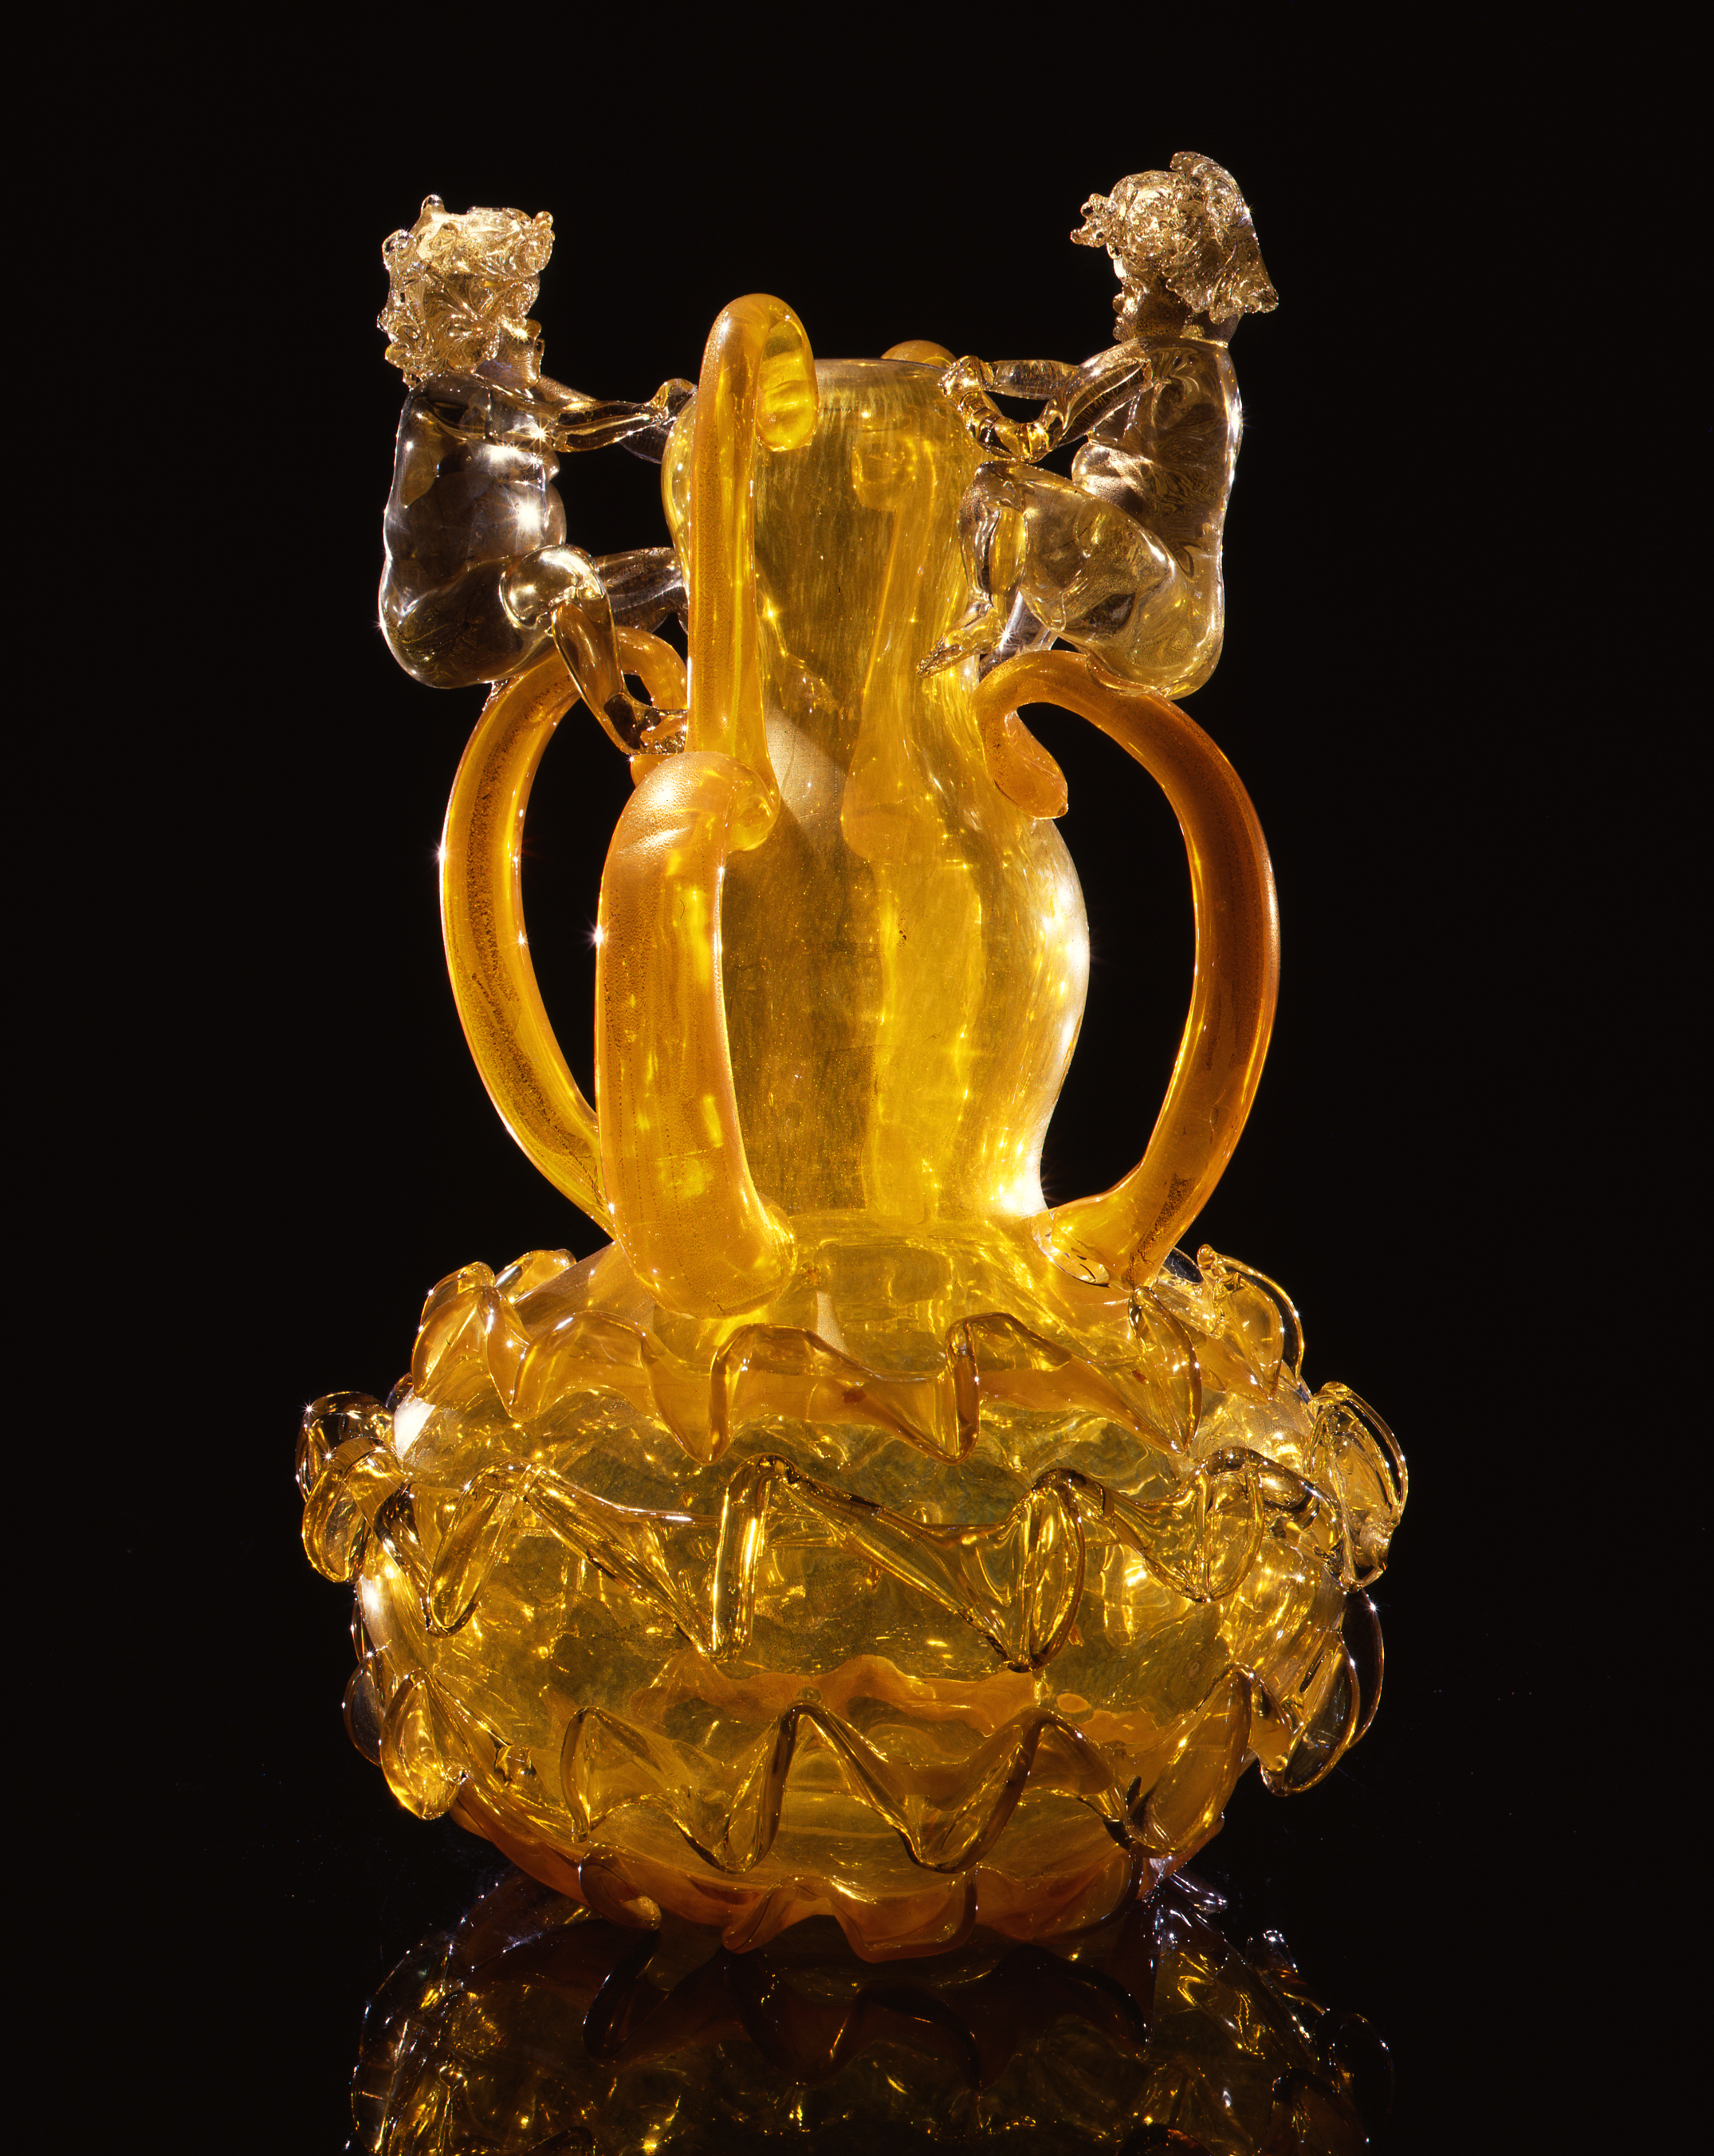  Dale Chihuly,&nbsp; Gilt Tangerine Putti Venetian with Handles and Ribbons&nbsp; (1994, glass, 19 x 13 x 13&nbsp;inches) 